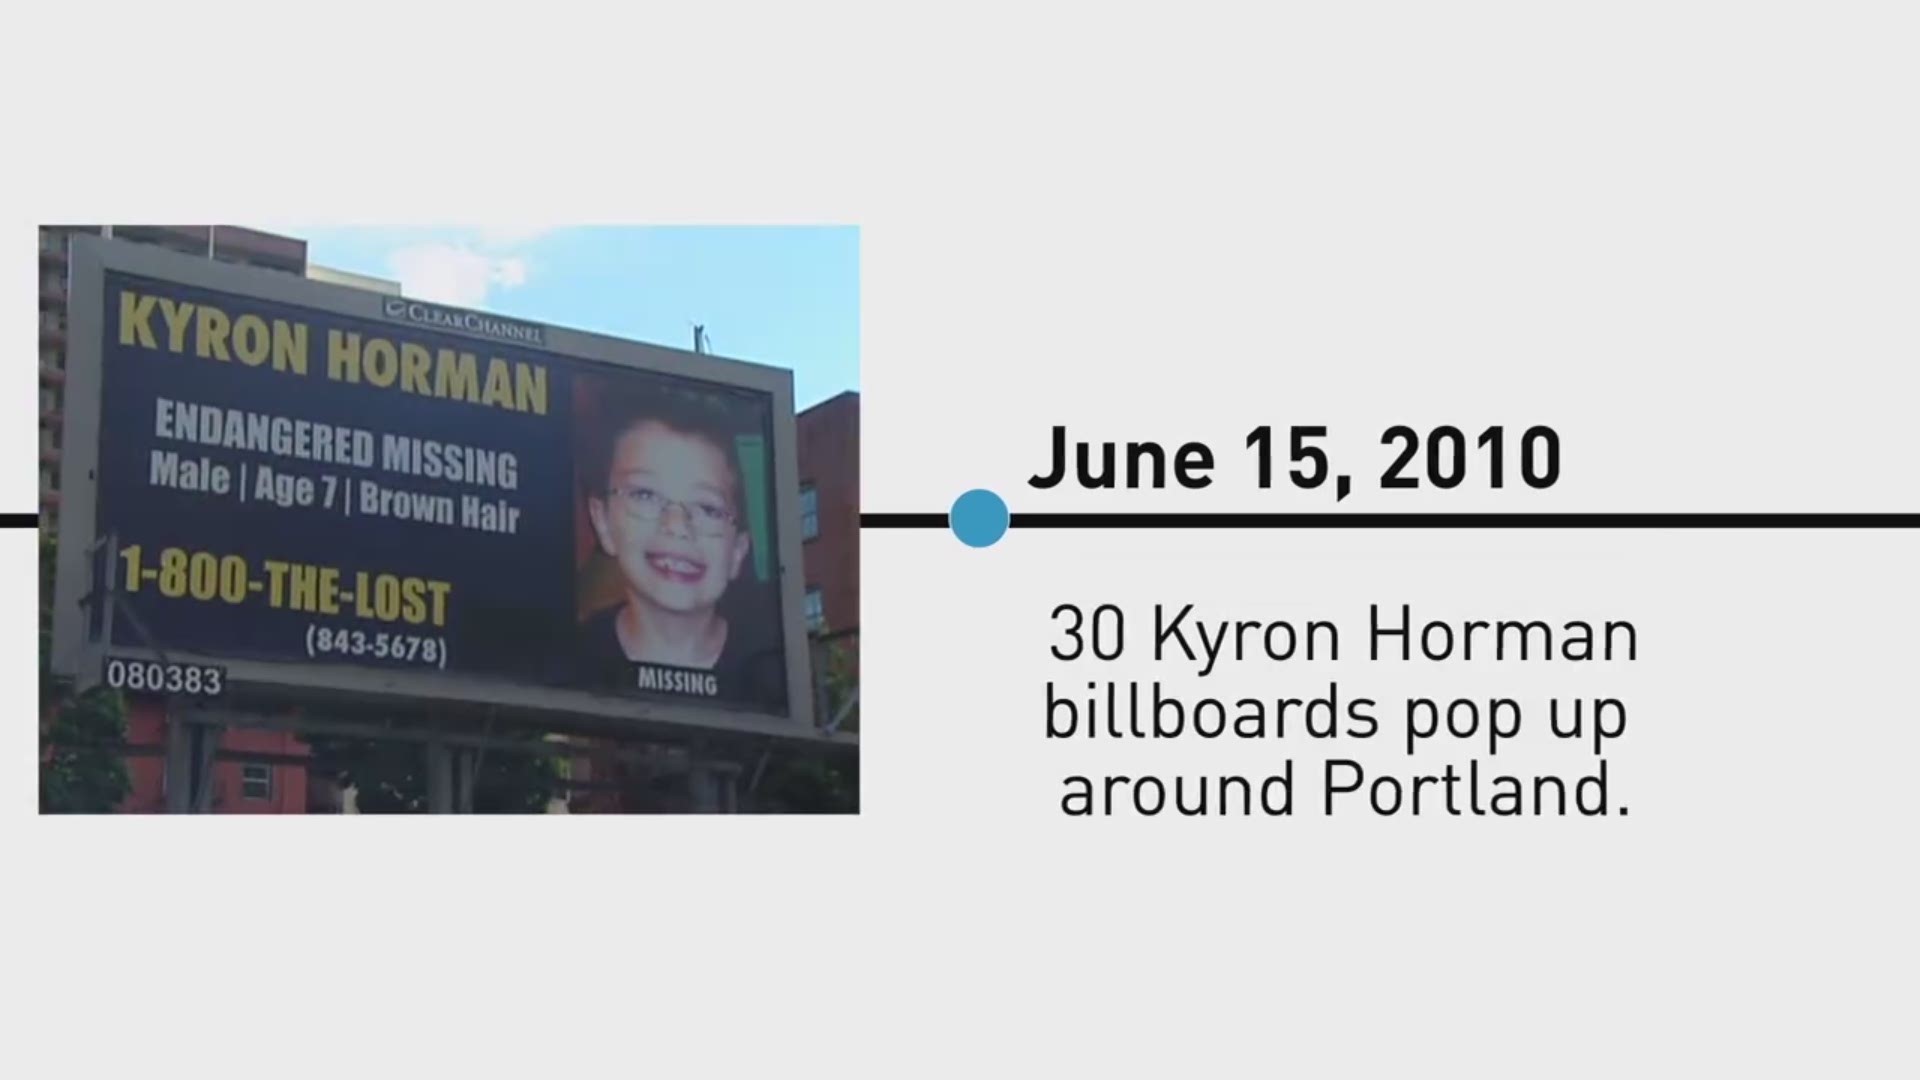 Seven years ago today Kyron Horman disappeared. Here's a look back at some of the significant milestones after he went missing.